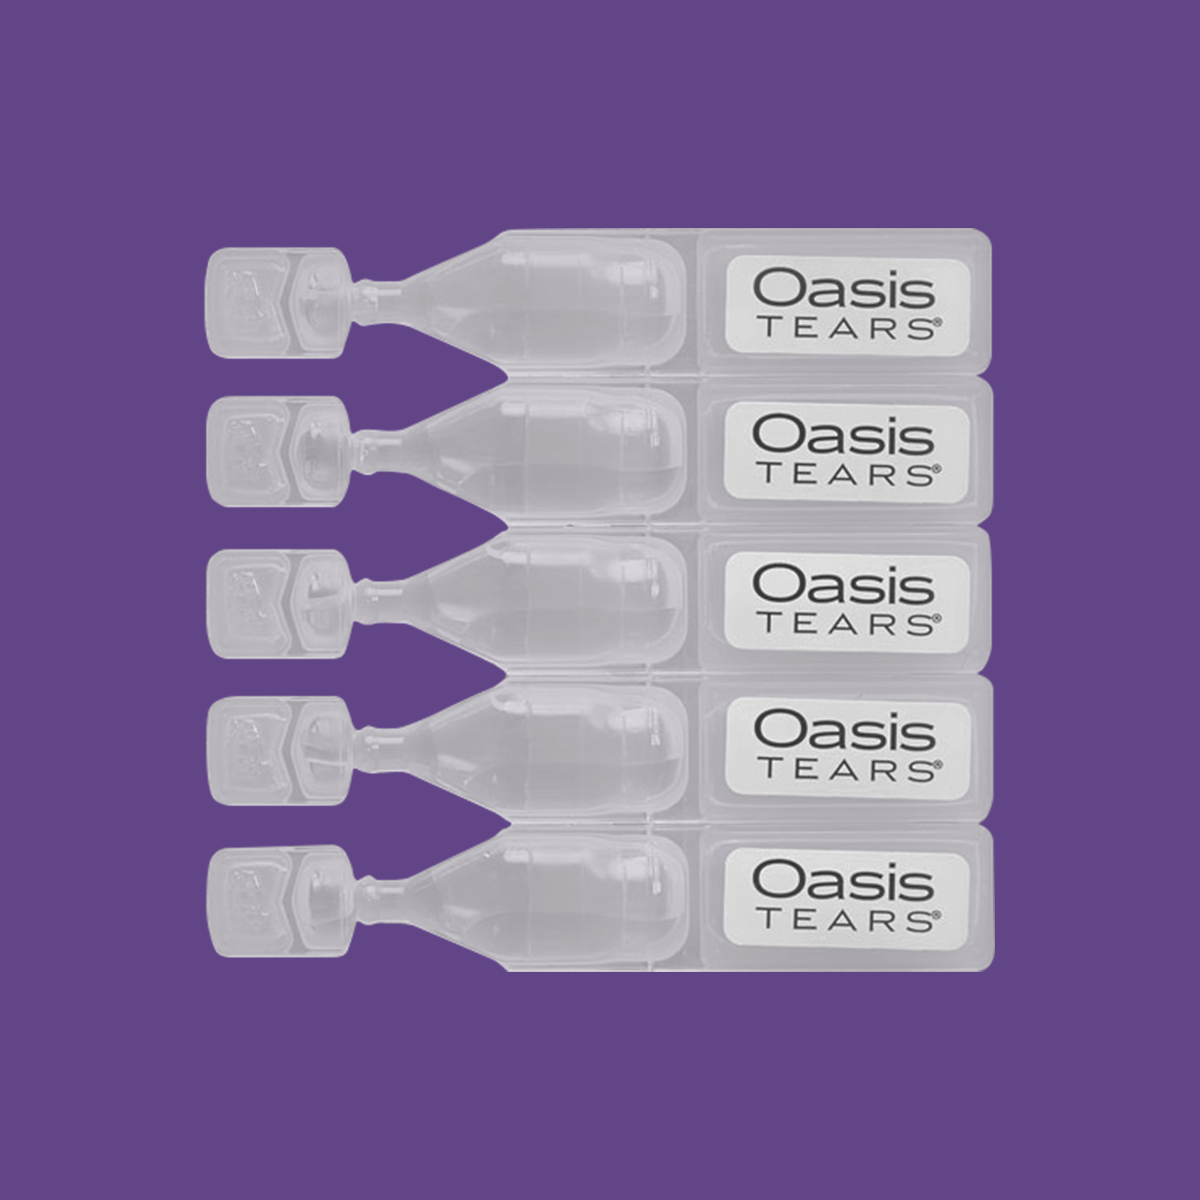 Oasis Tears Plus Preservative-Free Eye Drops Moderate to Severe (30ct Vials)